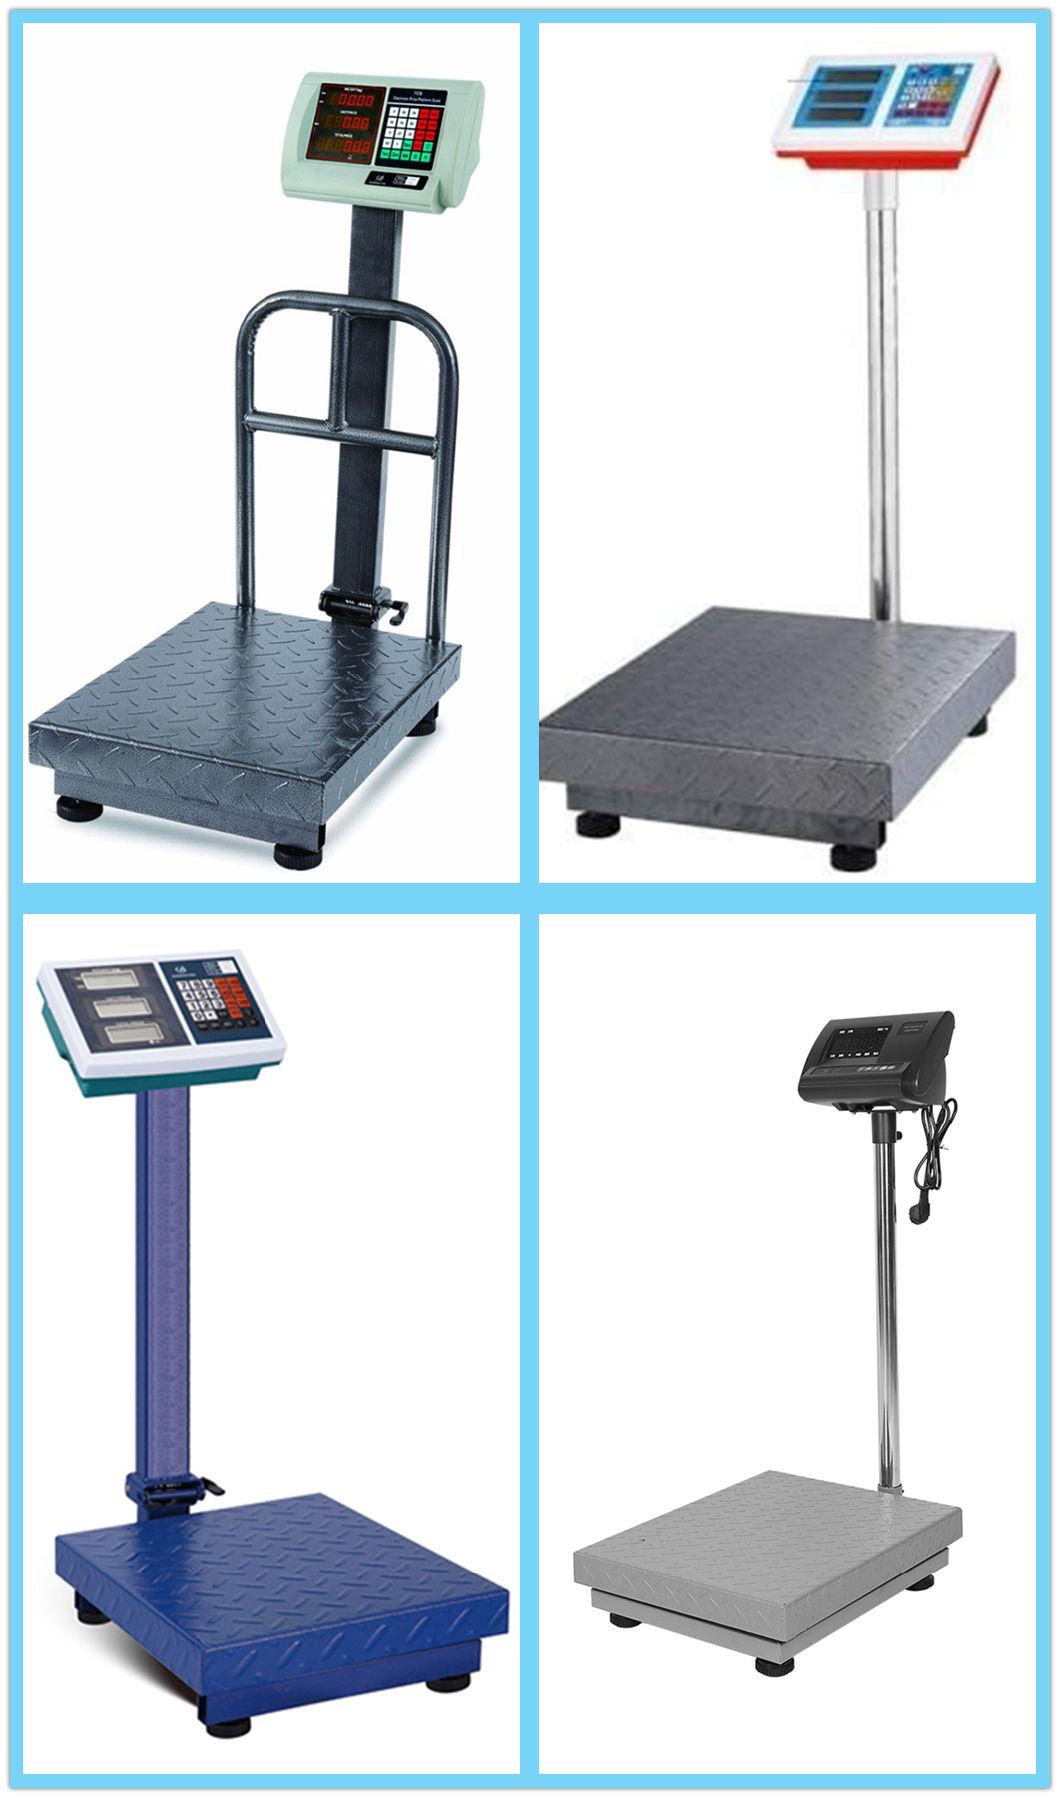 Factory Price Platform Scale Heavy Duty Weight Platform Scale with Optional Indicators 300kg Industrial Use 1 Year, 1 Year OEM